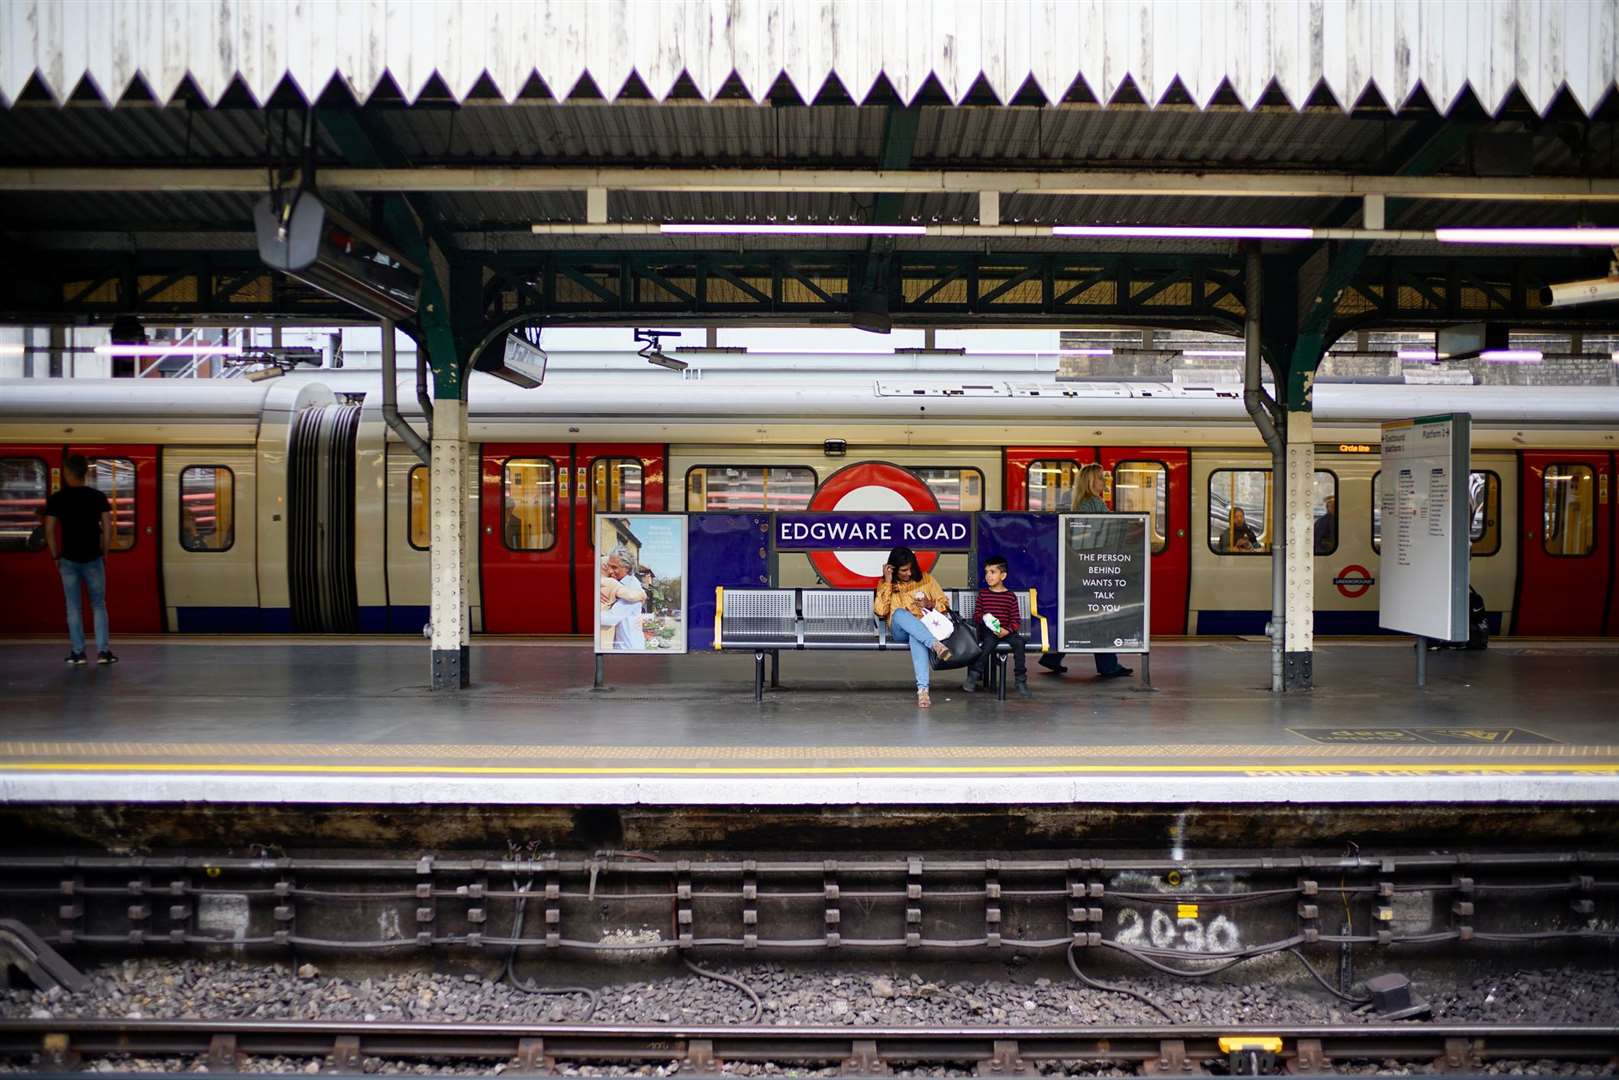 Transport for London (TfL) has told the RMT Union it's not too late to call of the strikes